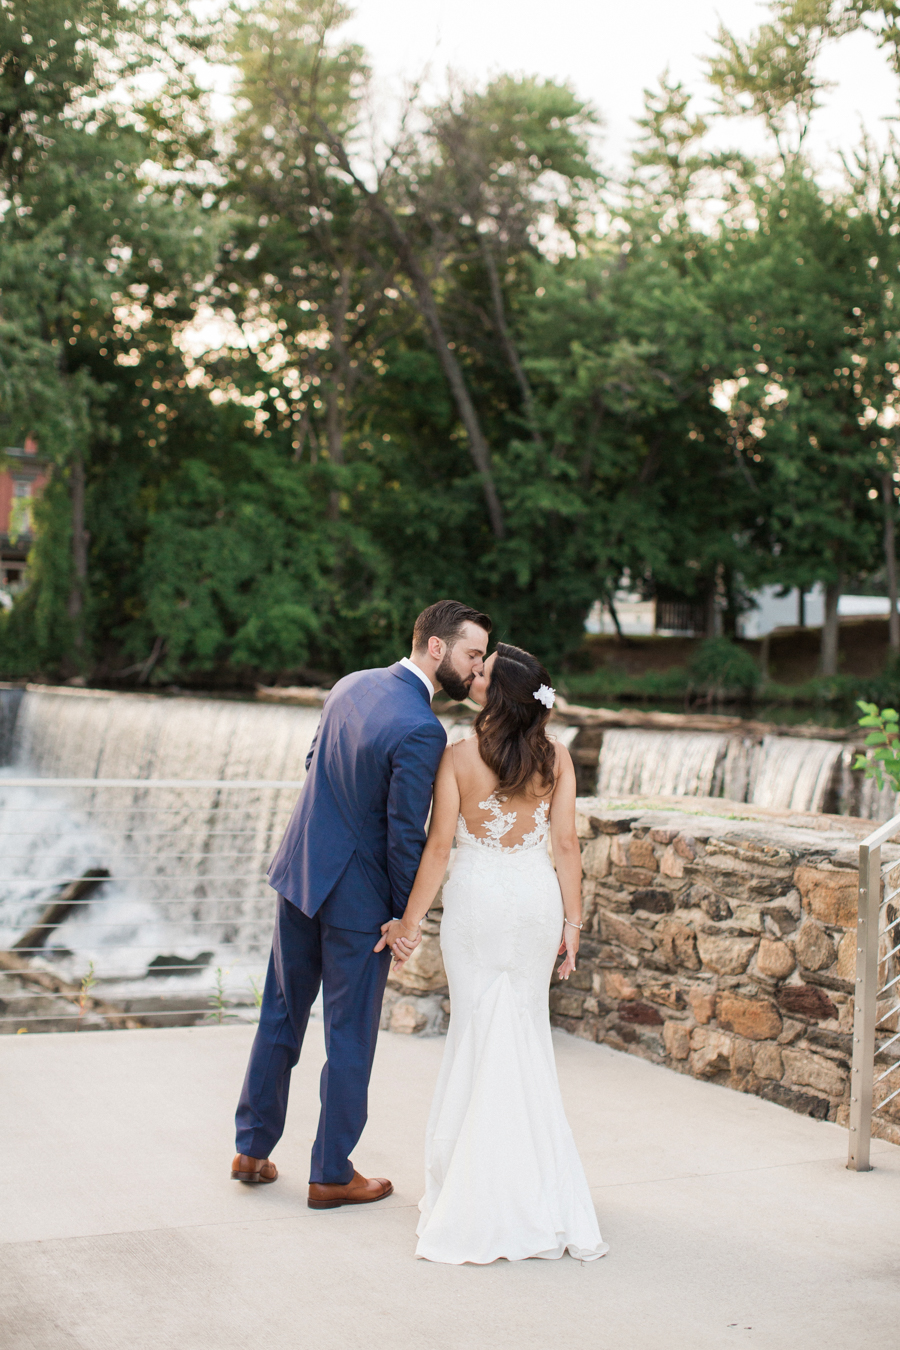 Wedding at Roundhouse Beacon in the Hudson Valley, New York.  Photos by Kelly Kollar Photography.